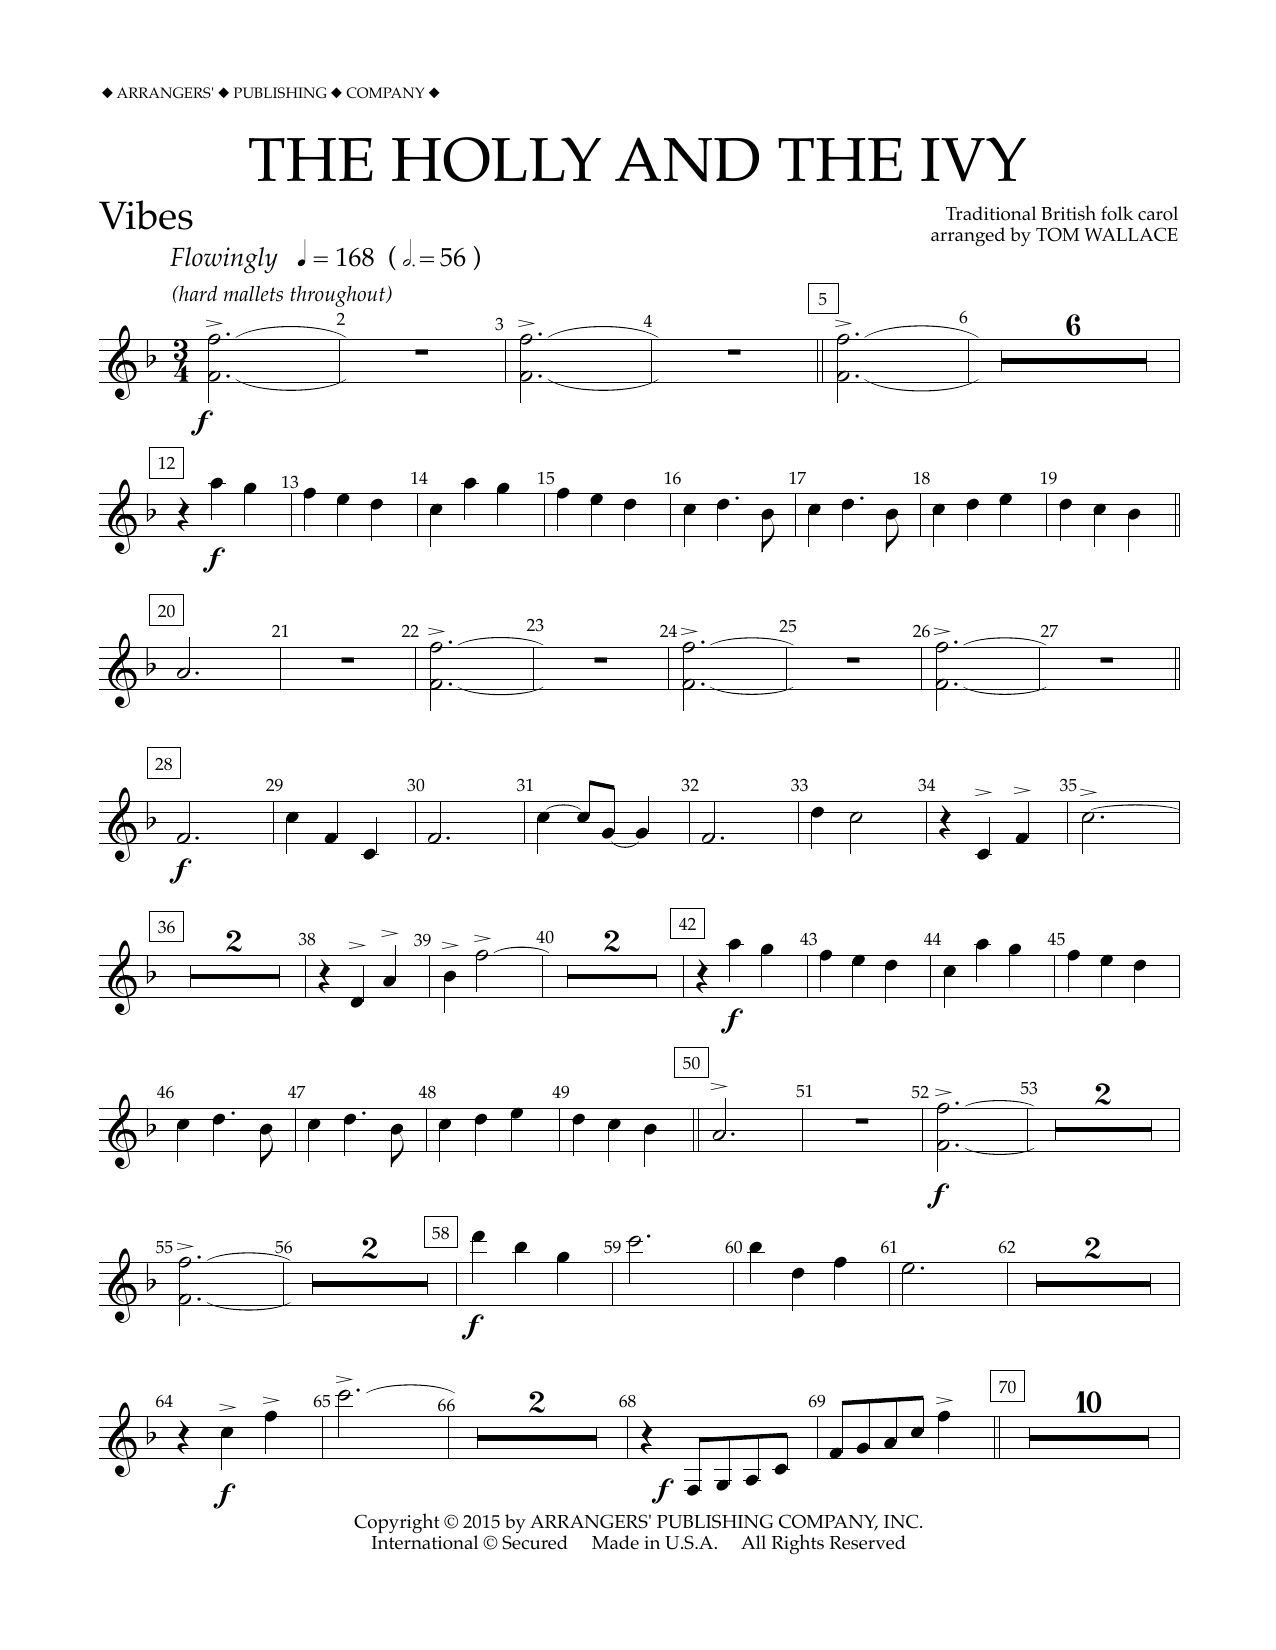 Download Tom Wallace The Holly and the Ivy - Vibes Sheet Music